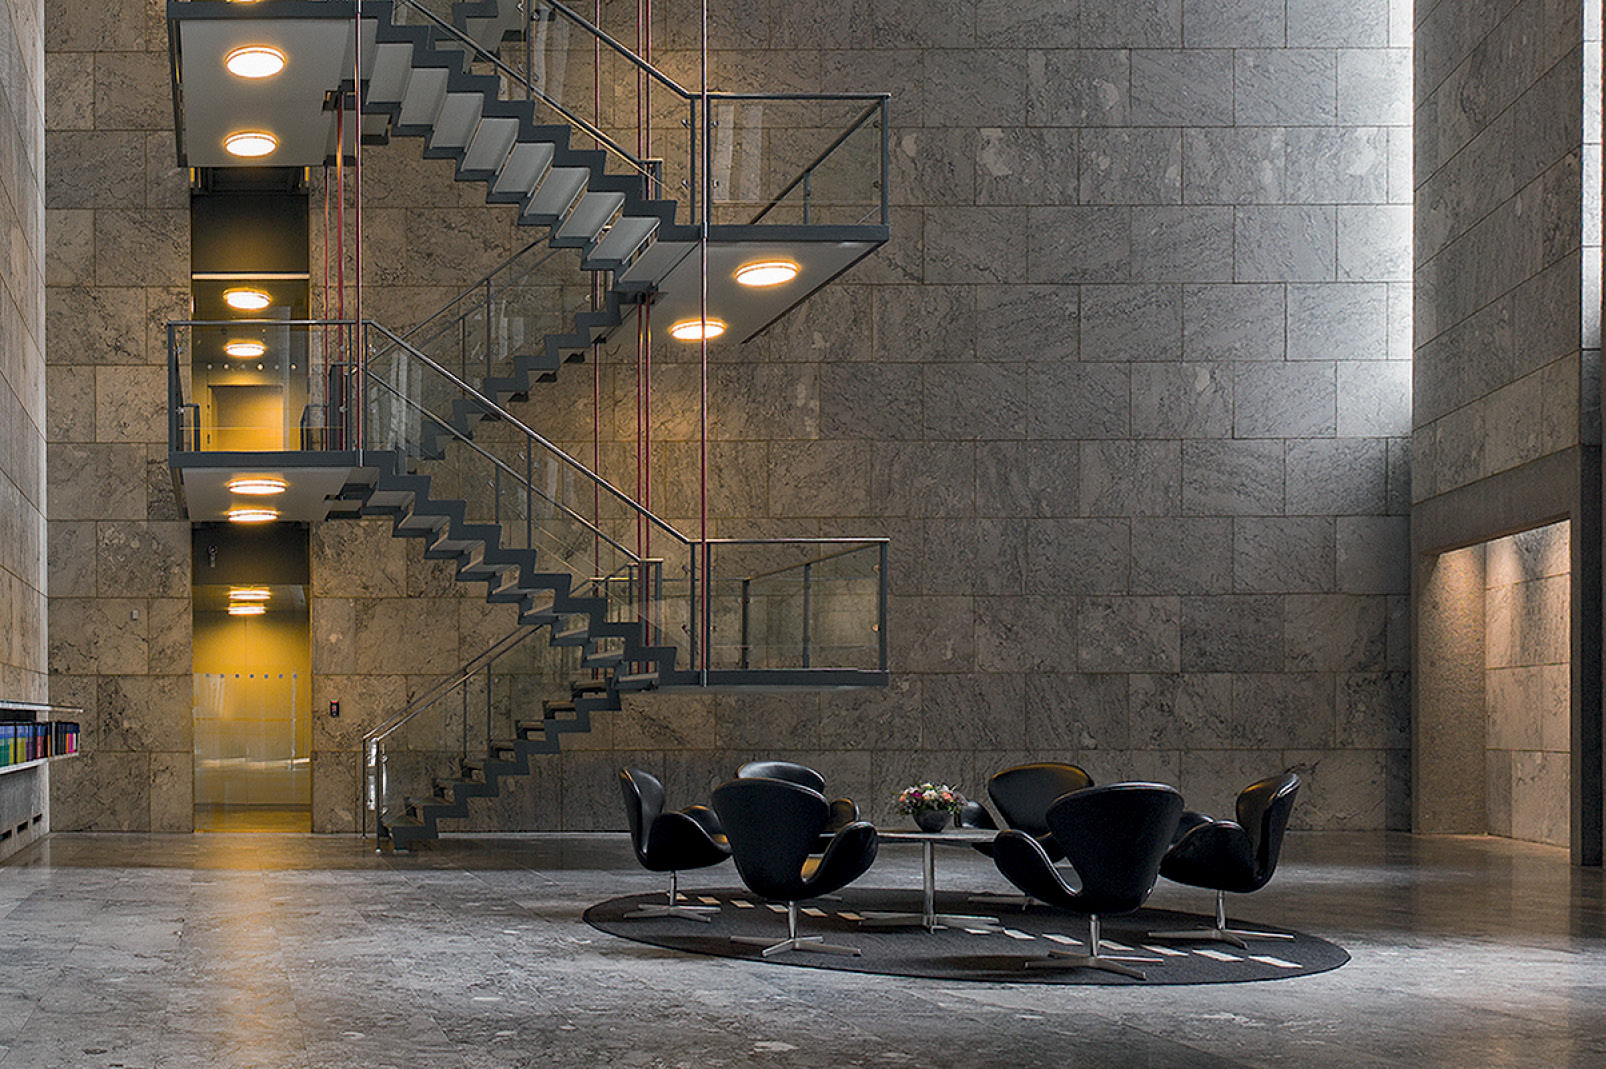 The foyer in the National Bank of Denmark furnished with Swan chairs. Photo: The National Bank of Denmark.